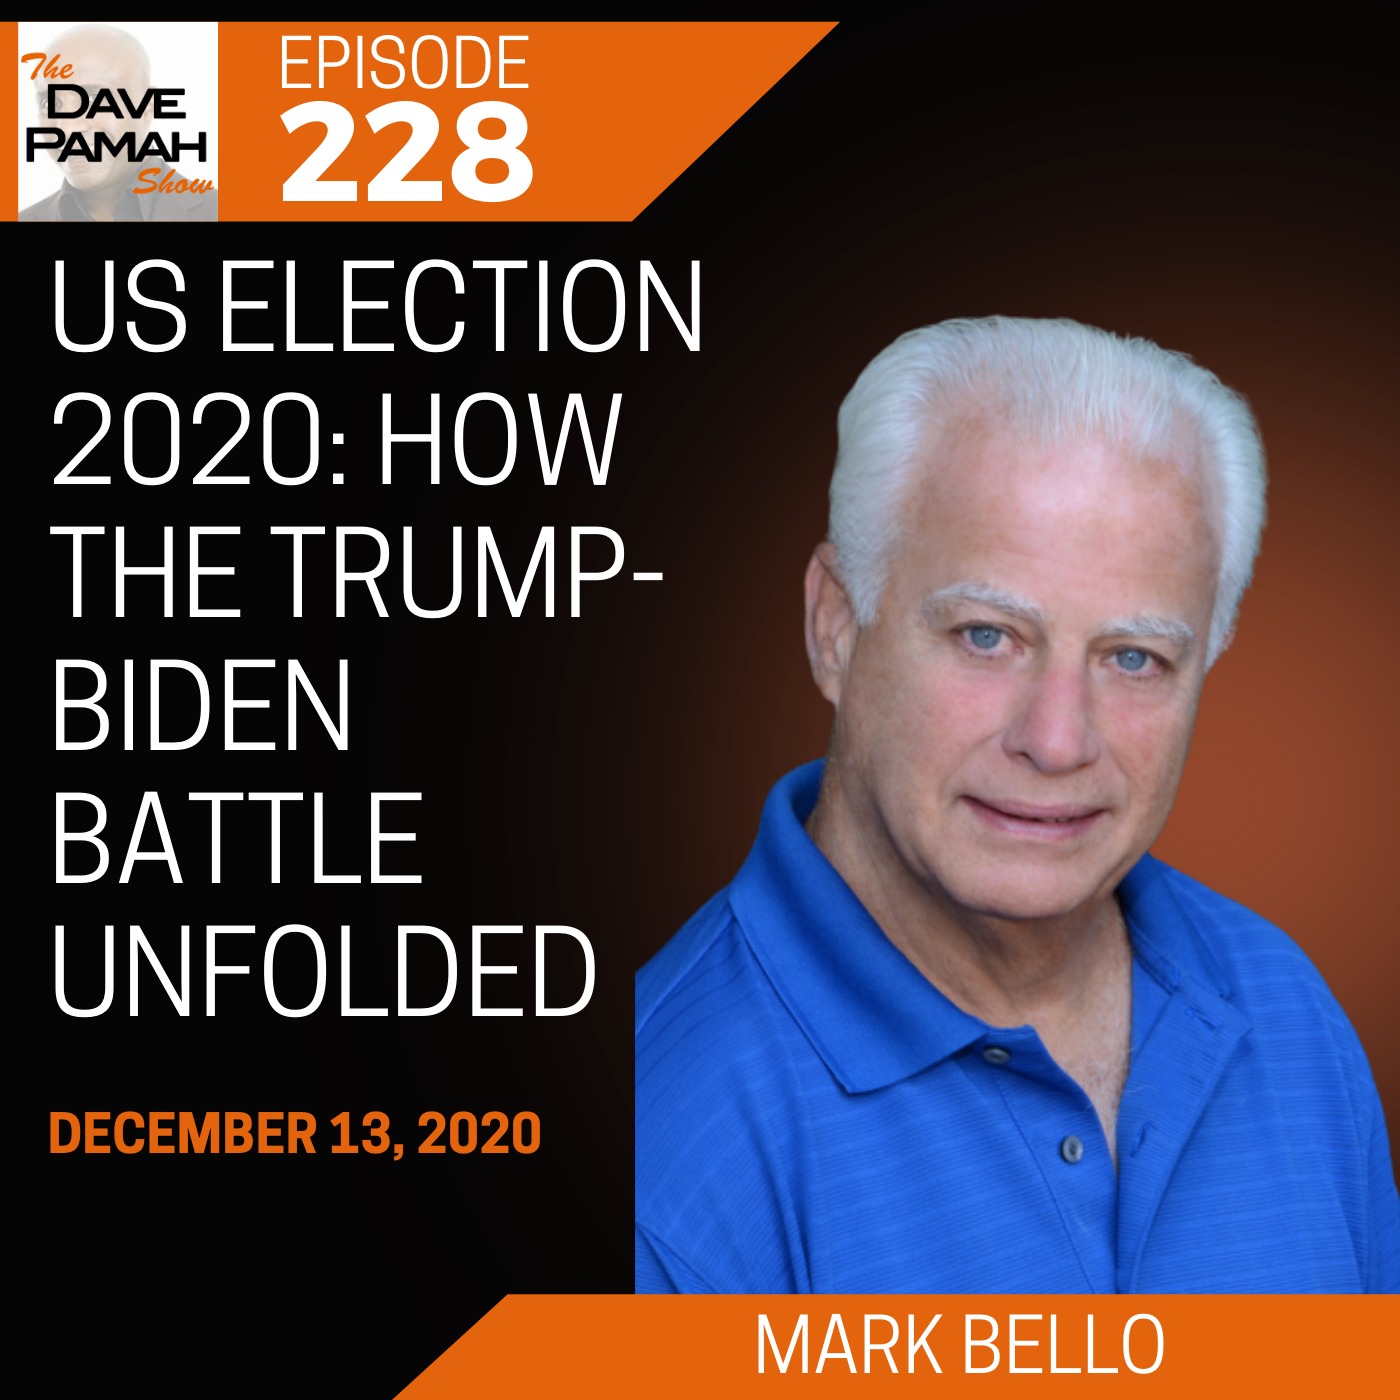 US election 2020: How the Trump-Biden battle unfolded with Mark Bello